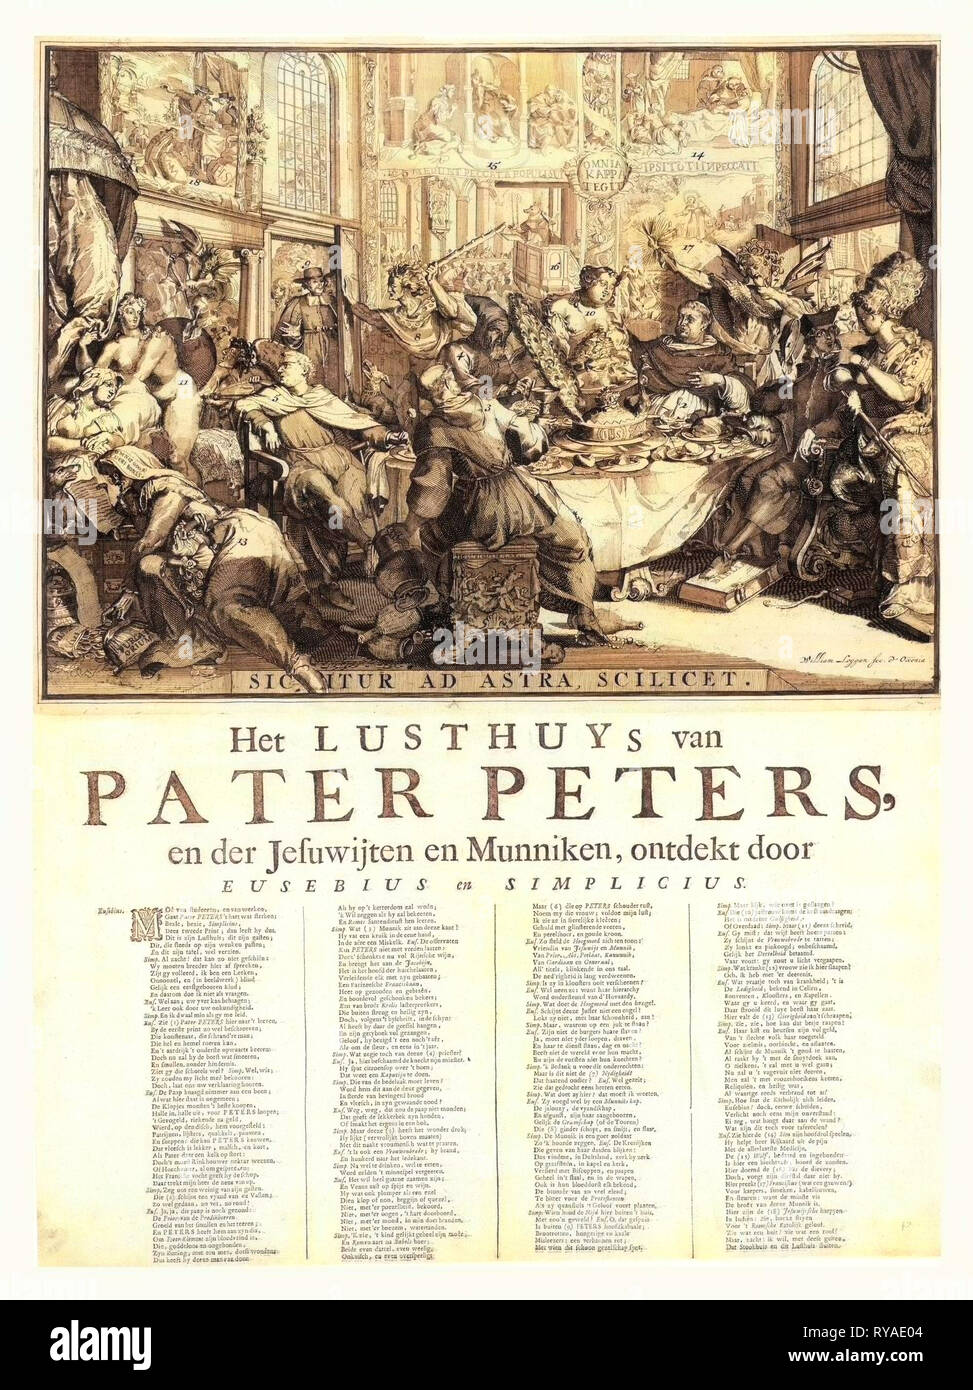 Het Lusthuys Van Pater Peters, En De Jesuwijten En Munniken, Ontdekt Door, Sic Itur Ad Astra, Scilicet, [1681?], 1 Print (Broadside) : Etching with Letterpress., Print Shows Scene in a Bawdy House of Pleasure Frequented by Father Petre, Jesuits, and Monks, Where They Mingle and Dine with Such Figures As: Wantonness, Avarice, Sloth, Fury, and Vanity. Priests Engage in Lascivious Acts and Steal Money from a Dying Person, a Protestant Minister is Driven Away from the Door, a Fox Delivers a Sermon from a Pulpit, and Jesuits Help Themselves to Treasures in India. Individual Figures Numbered Stock Photo